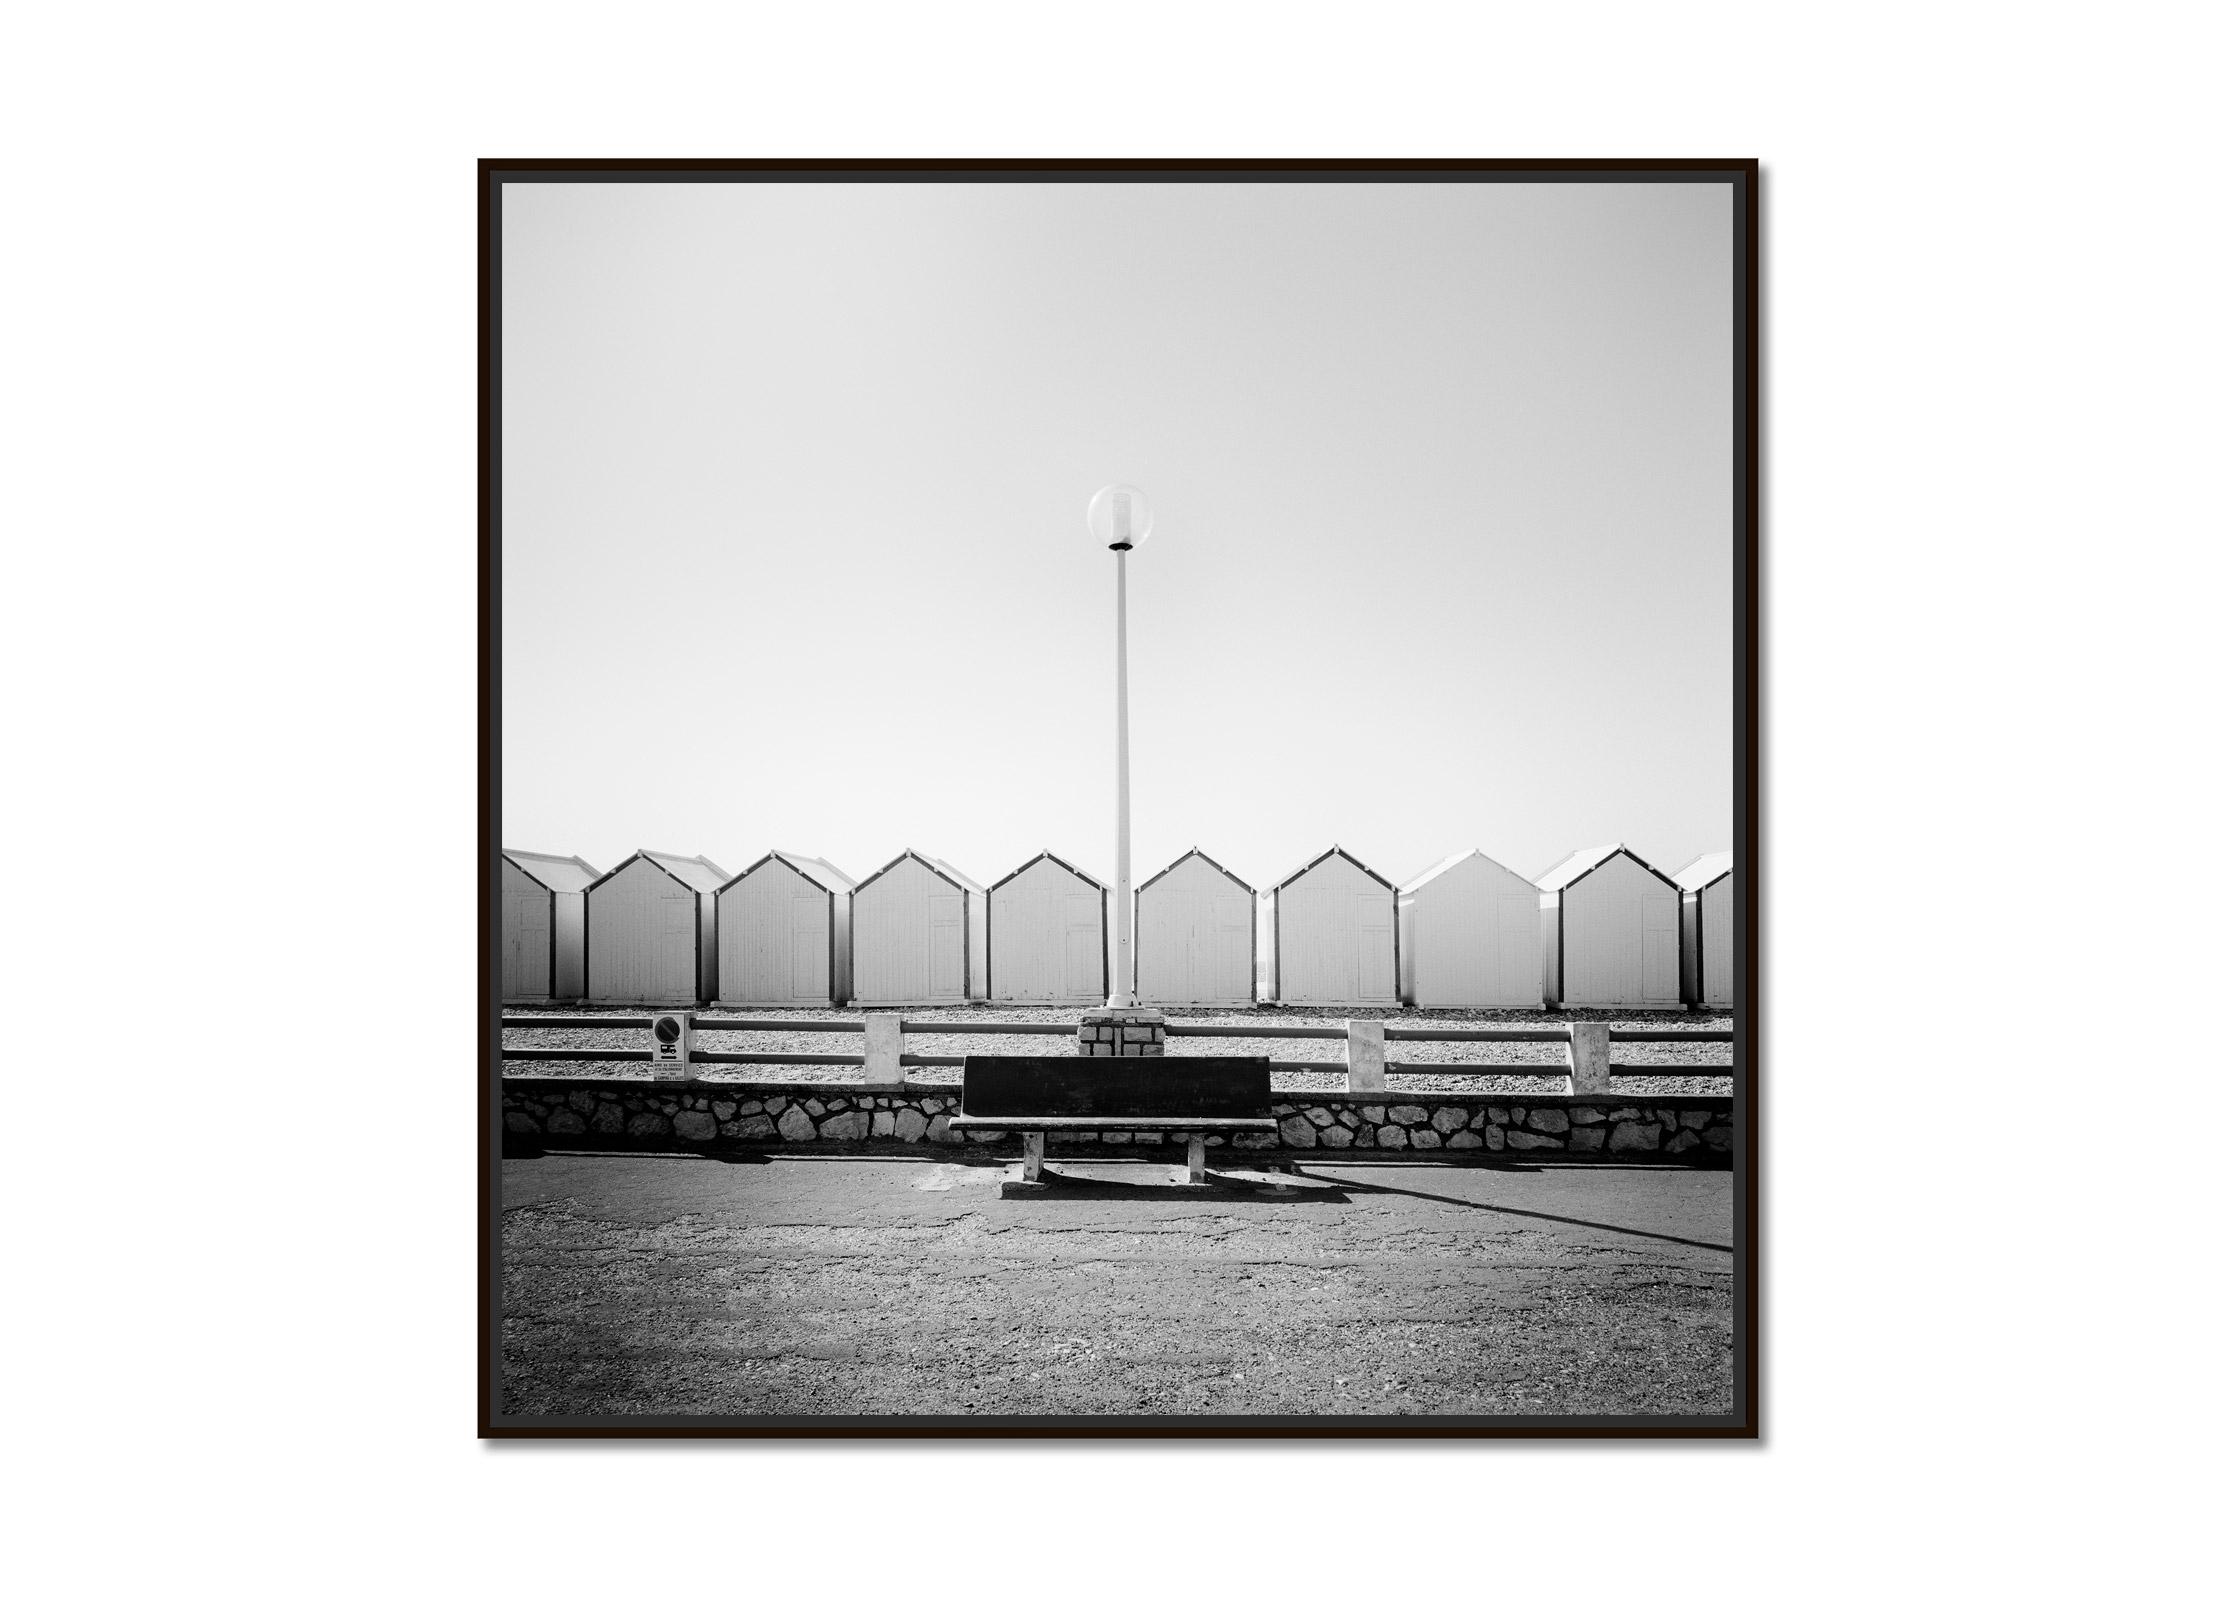 Bench on the Promenade beach huts France black white landscape art photography - Photograph by Gerald Berghammer